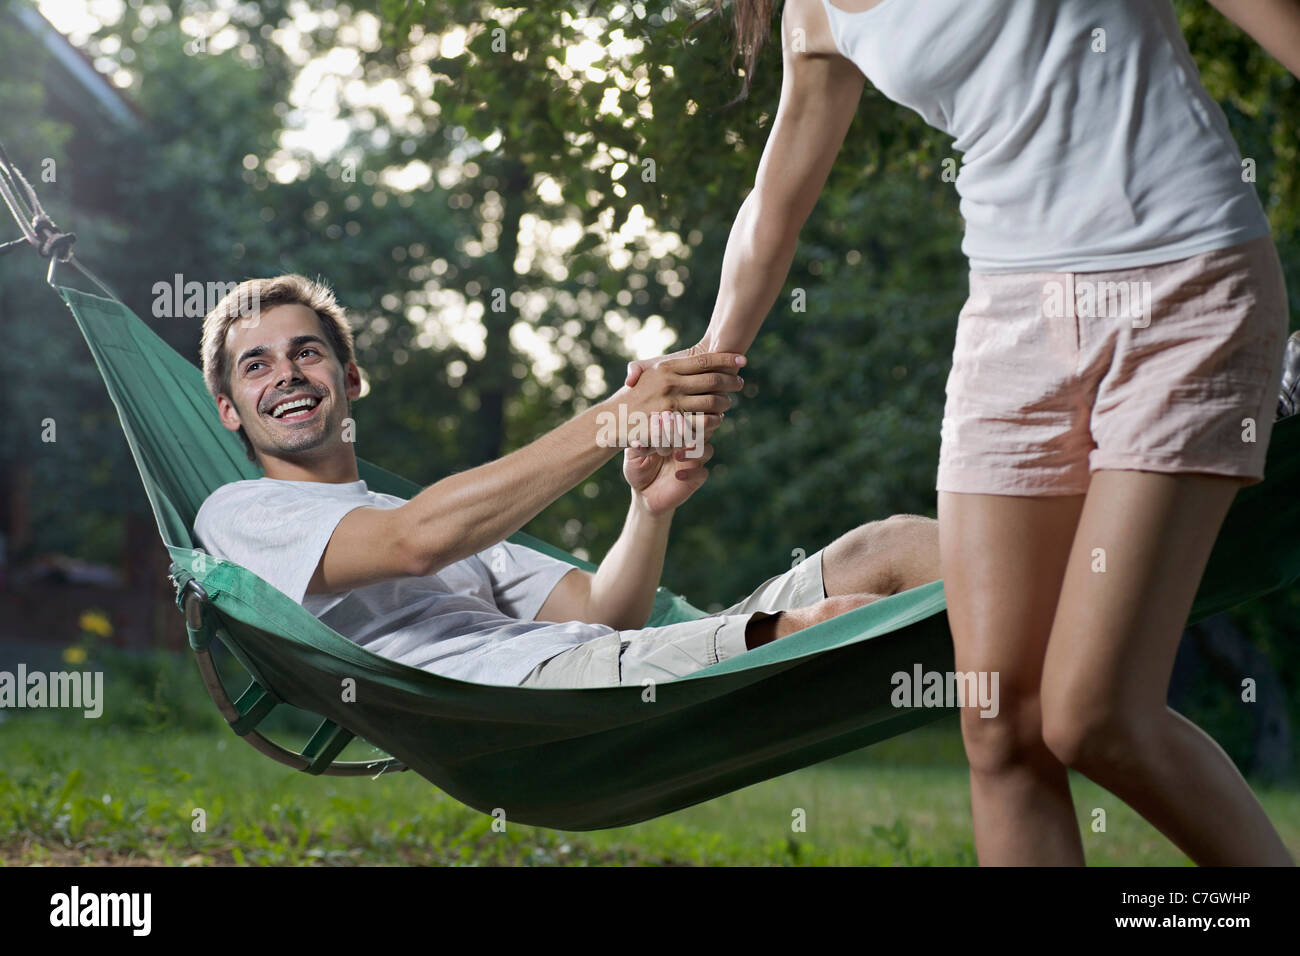 A man lying in a hammock pulling his girlfriend down Stock Photo